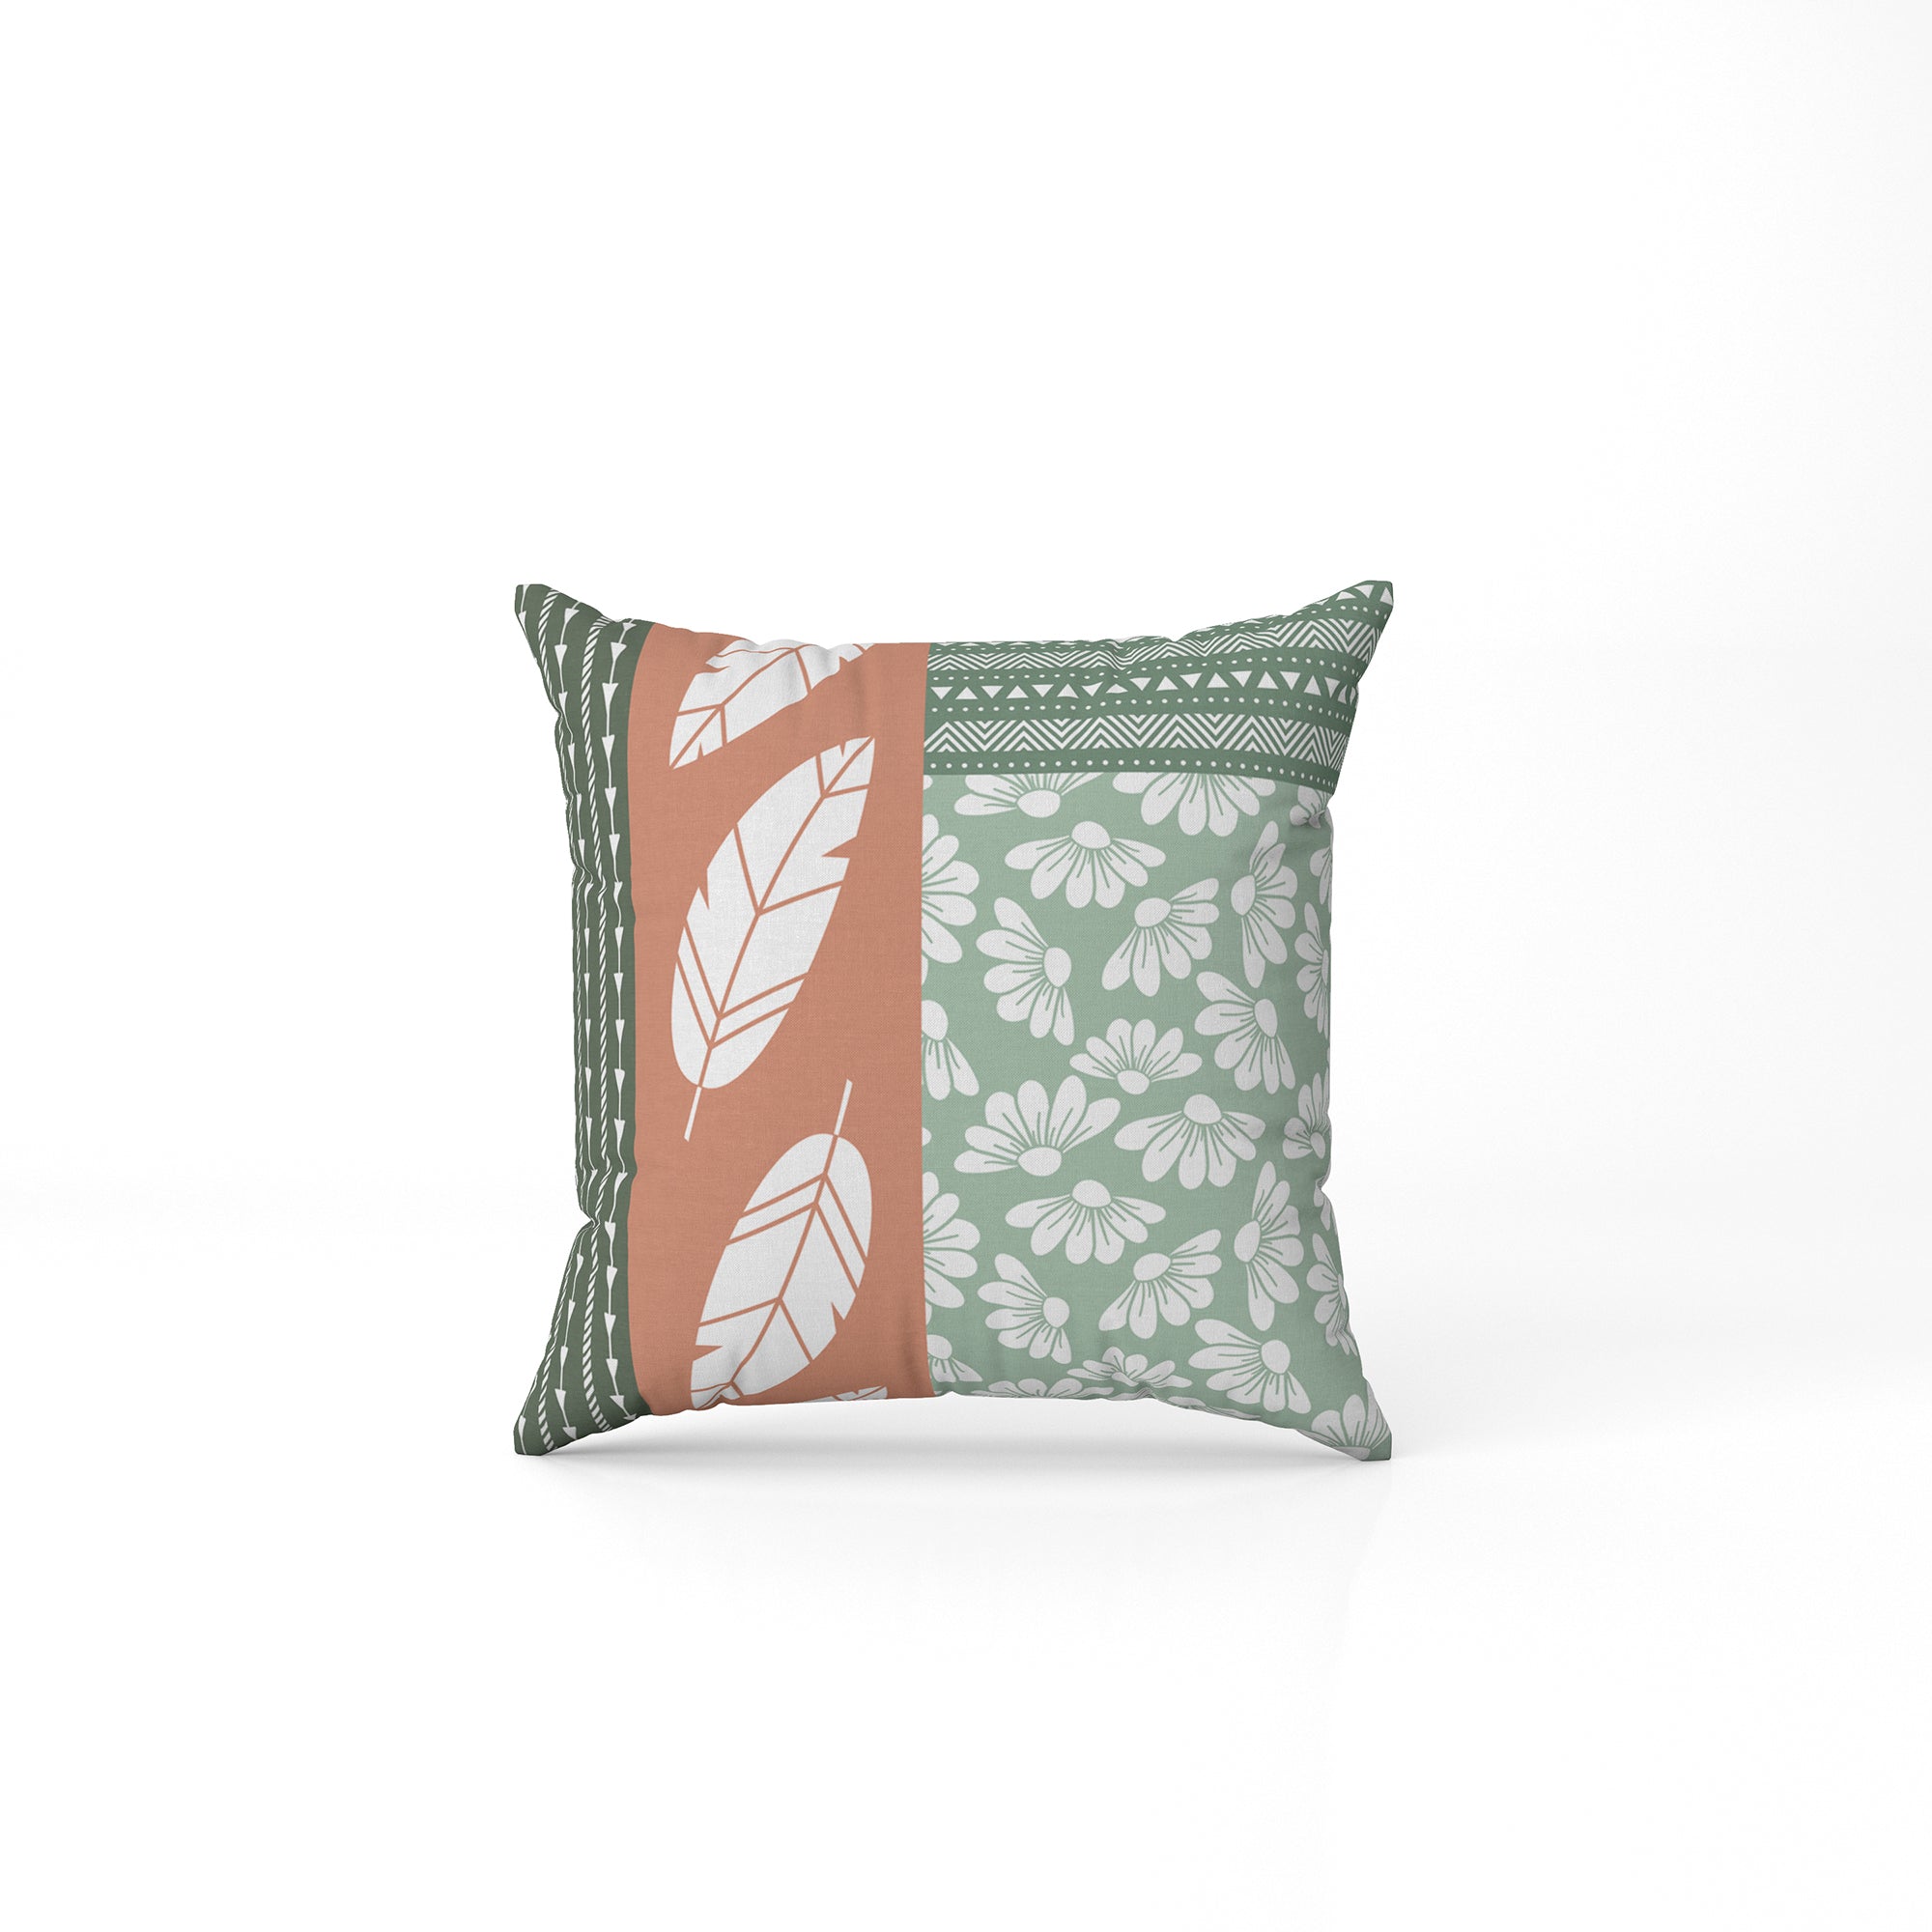 Shades of Autumn Printed Pillow Cover